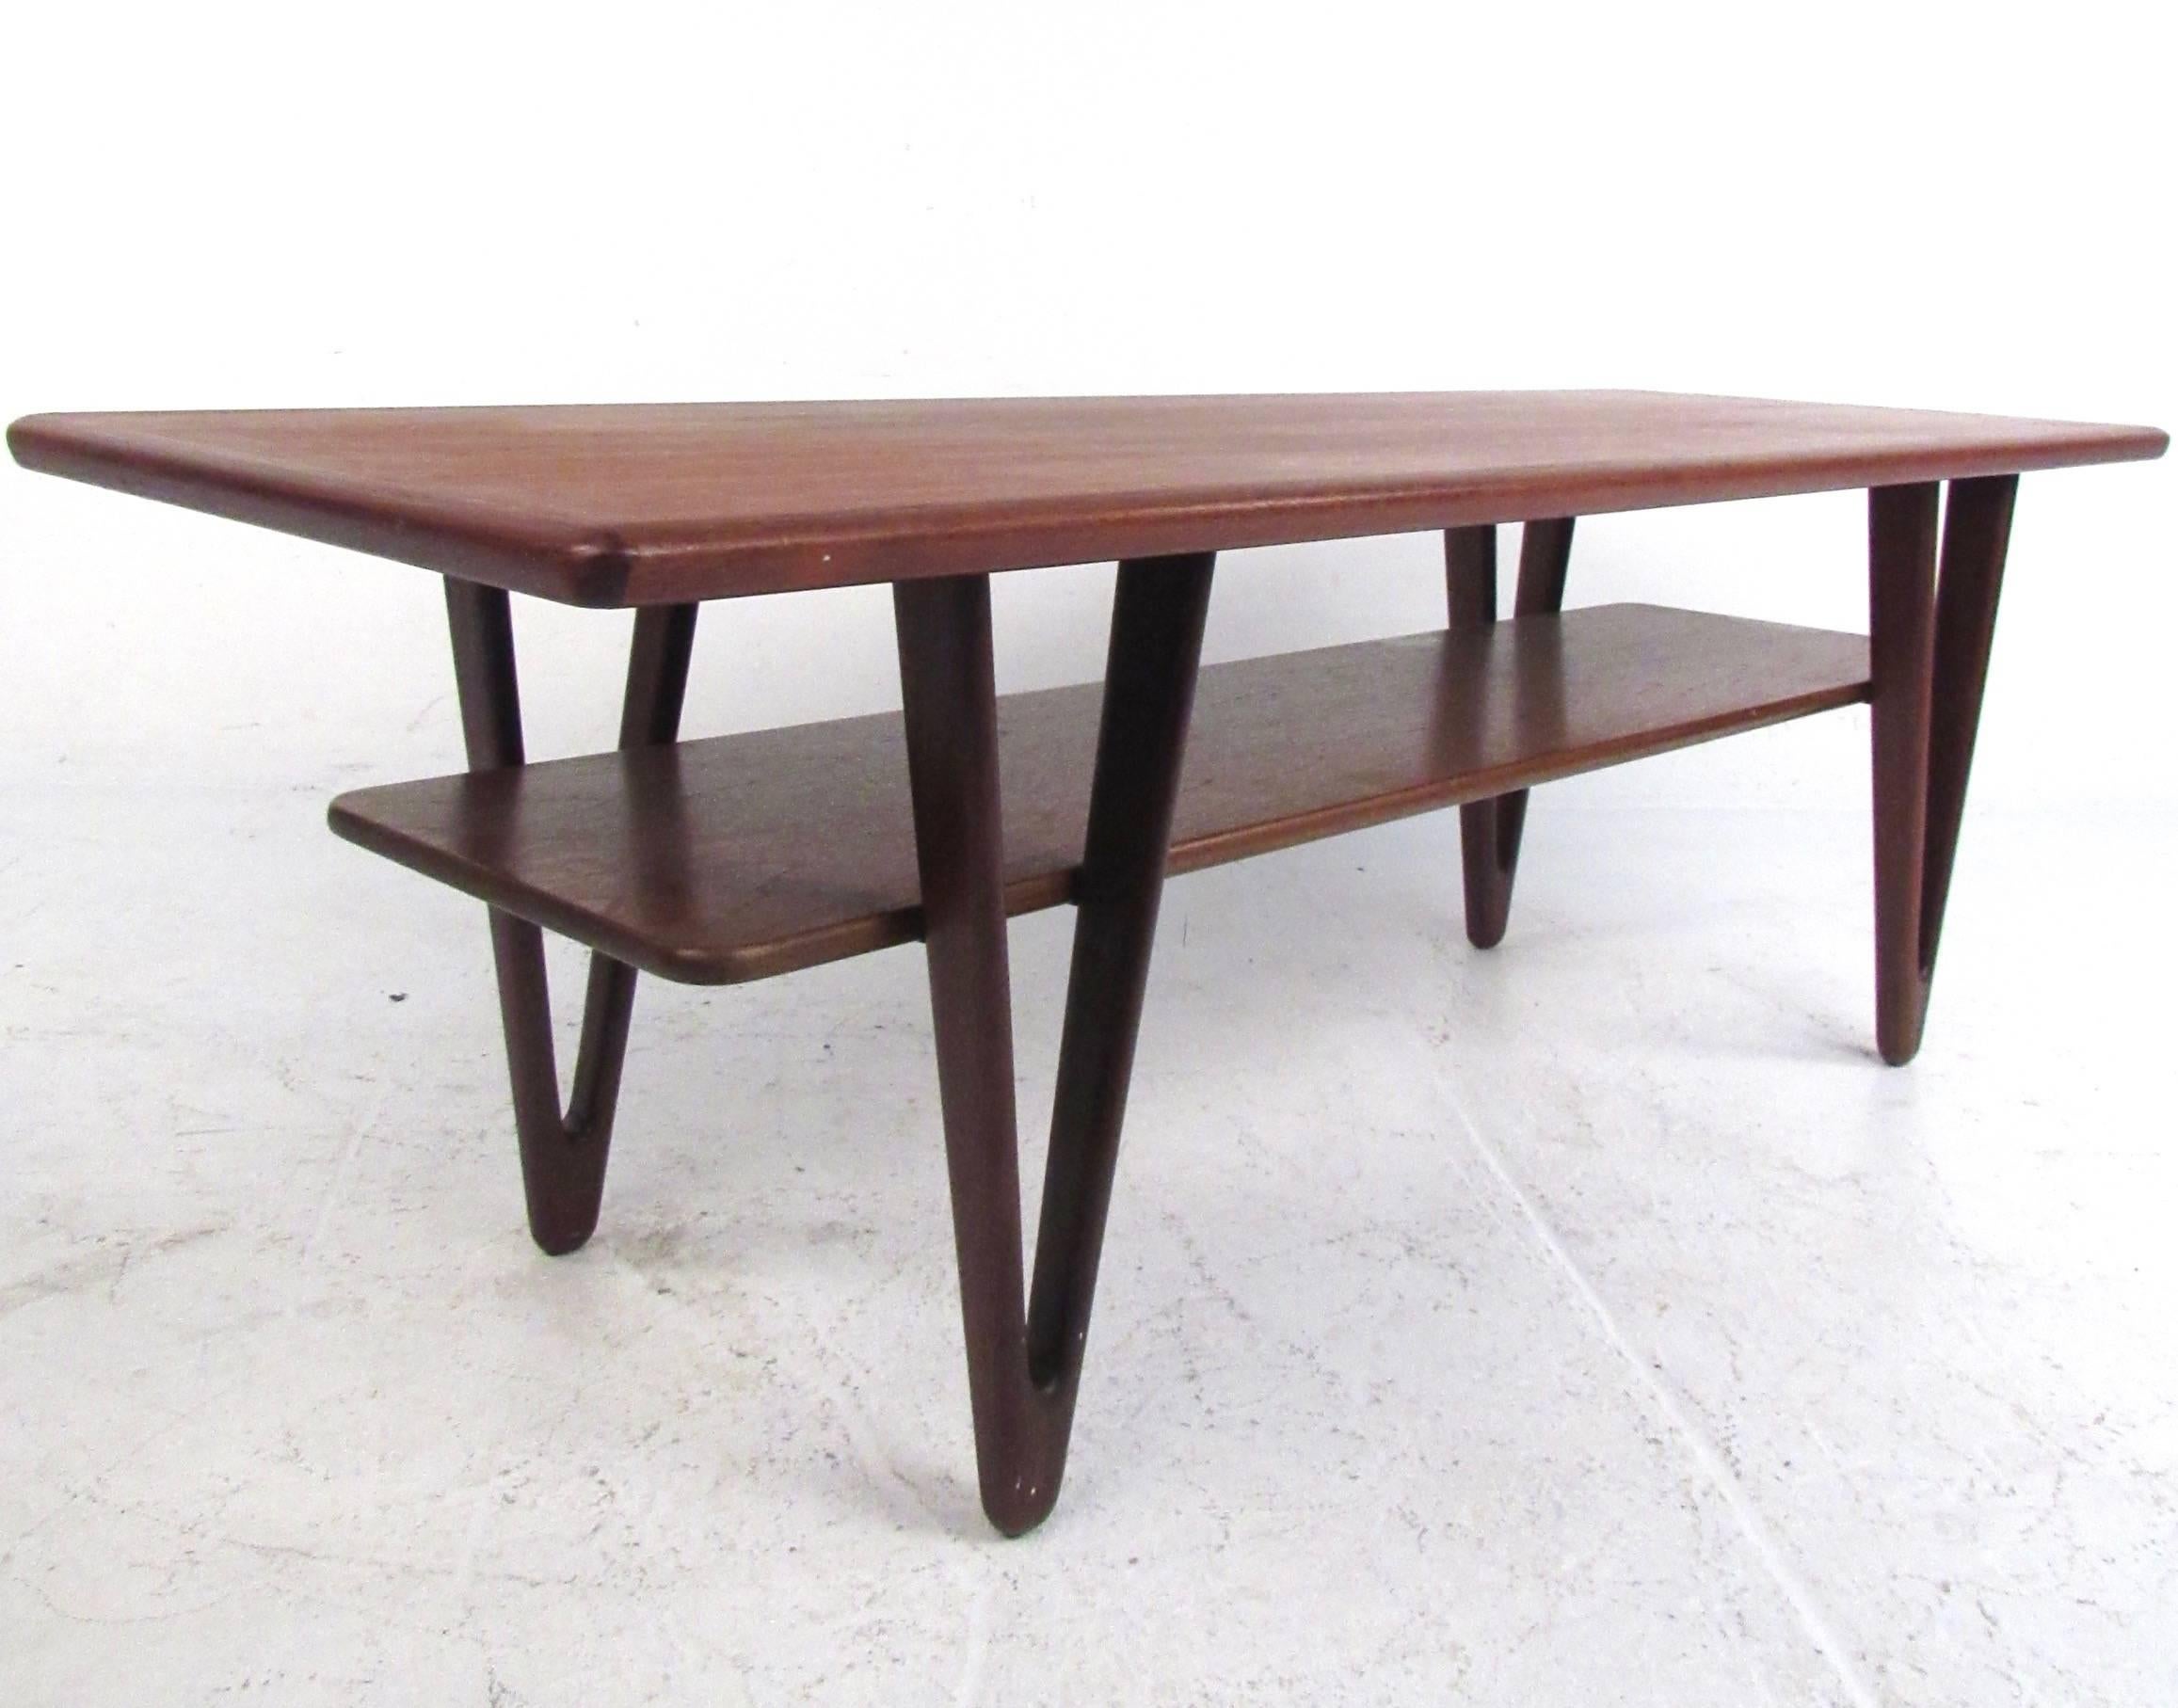 This stunning vintage modern coffee table by Kurt Ostervig features unique sculpted legs and a second tier shelf for extra storage. Visually impressive design sets this unique triangular leg table apart from other Mid-Century options, and makes this